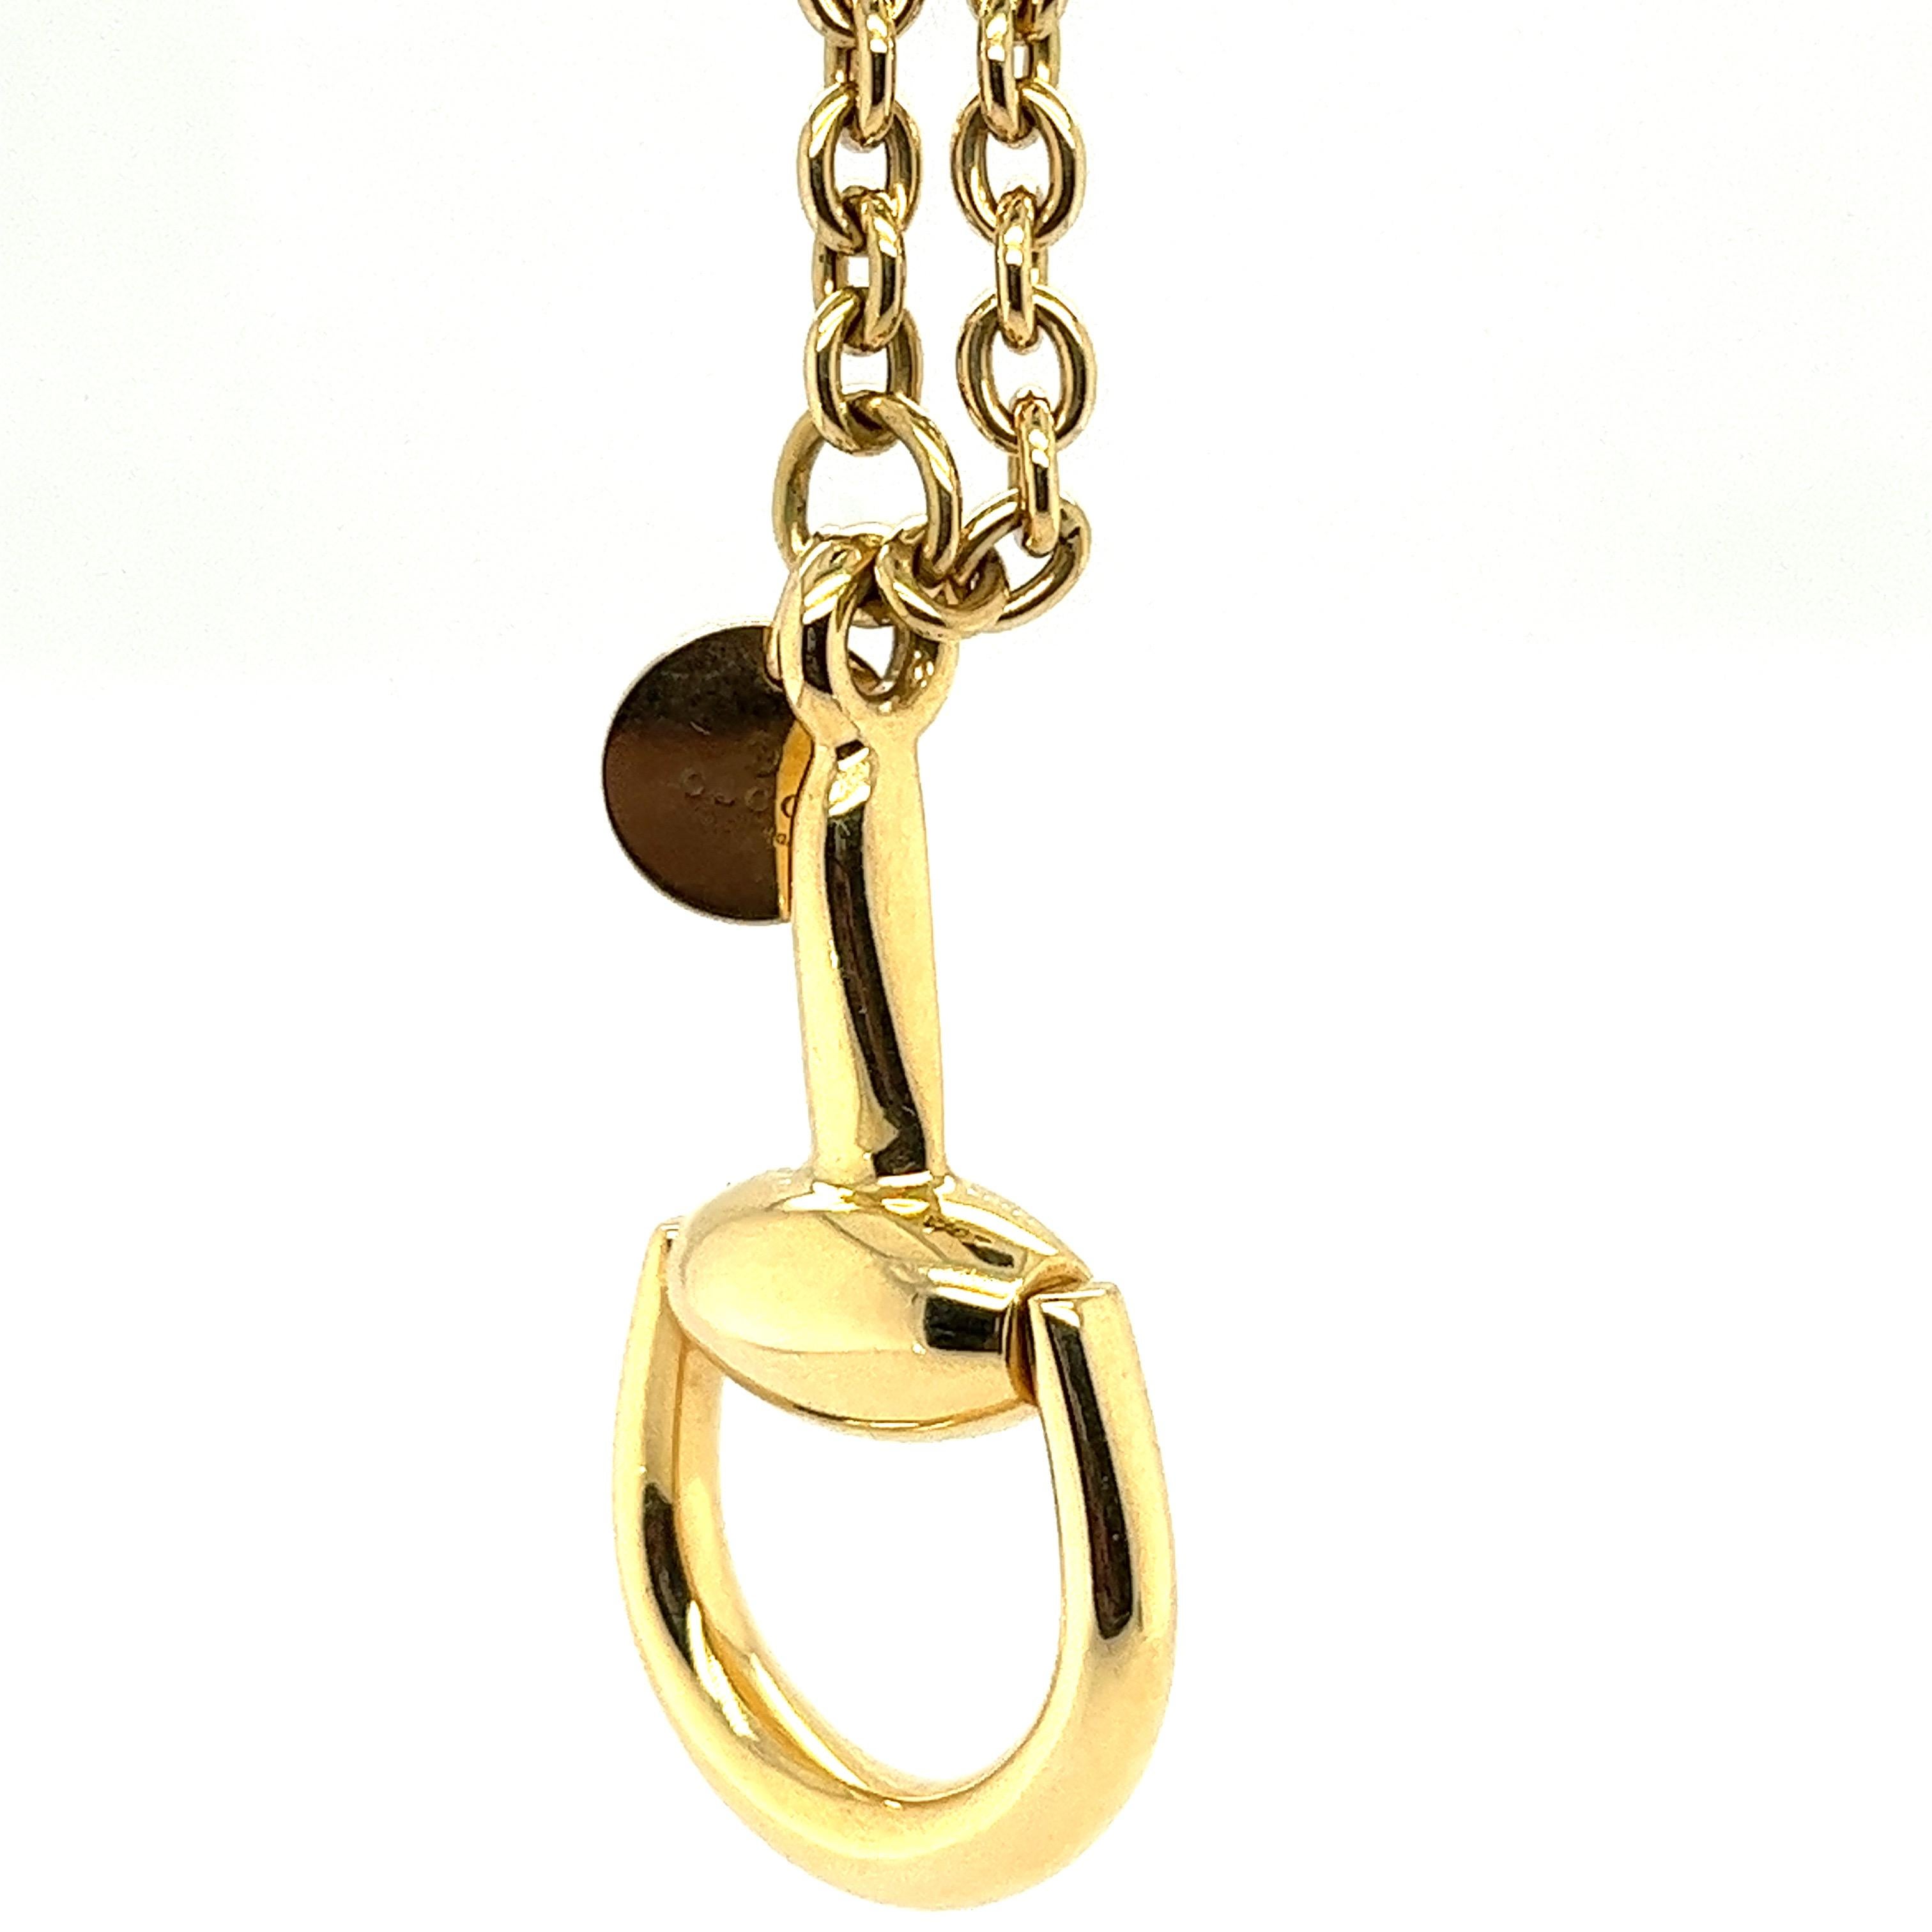 Gucci is known for its iconic horse bit collection, stemming from this collection is this stunning 18K yellow gold necklace with horse bit pendant. Small gold disc charm is attached with Gucci name stamped on it. 